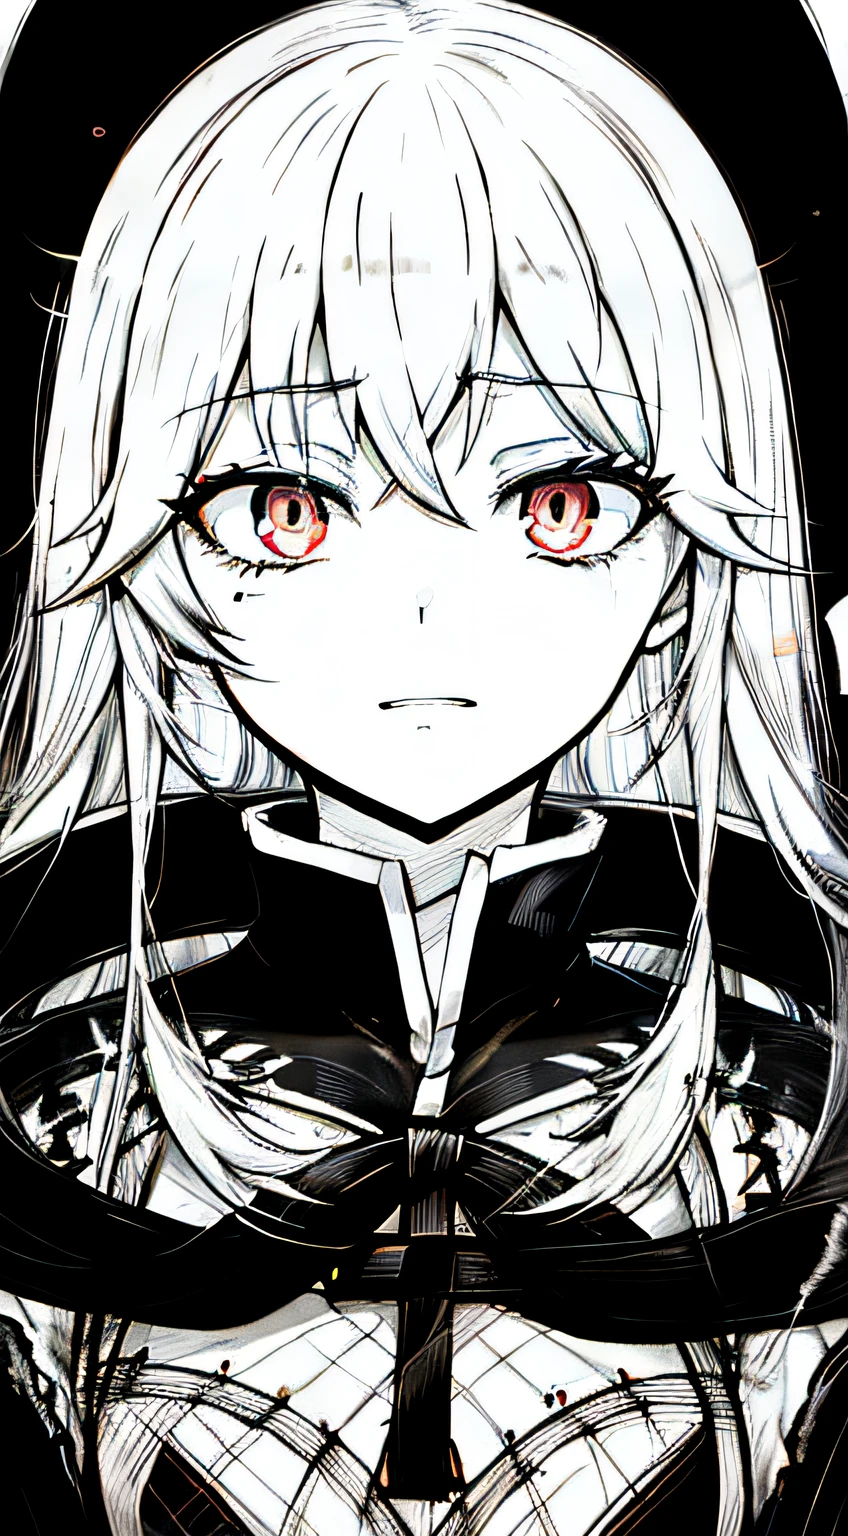 a drawing of a woman with long hair and a cross on her face, gapmoe yandere grimdark, intense black line art, black and white manga style, with anxious piercing eyes, portrait gapmoe yandere grimdark, yandere intricate, detailed anime face, gapmoe yandere, with haunted eyes and dark hair, highly detailed angry anime face, intense line art